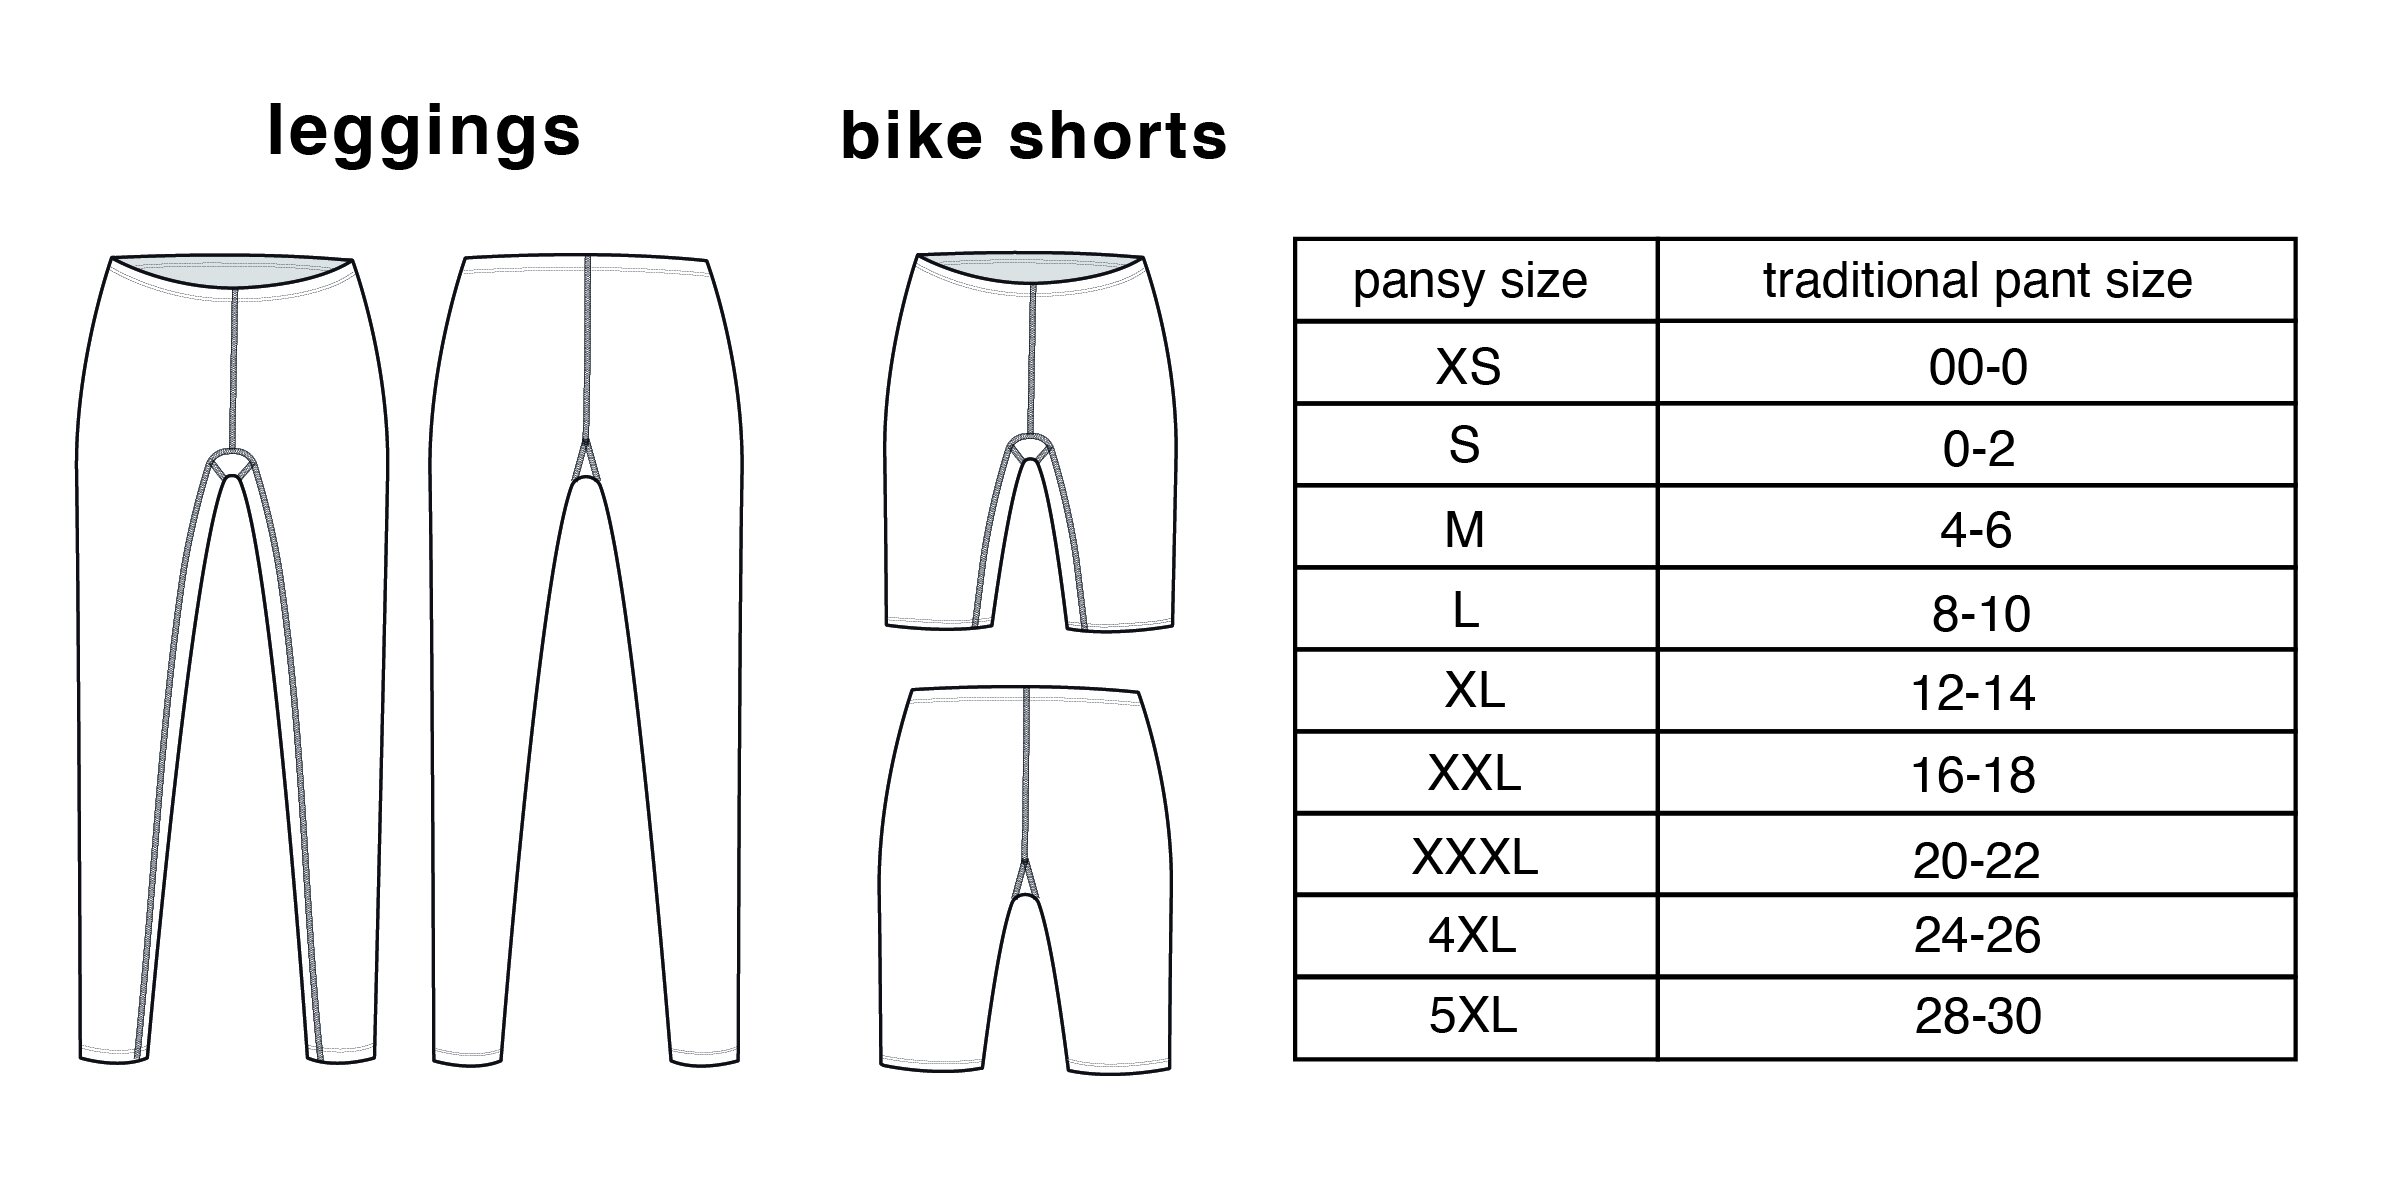 CLOTHING SIZE CHART — PANSY